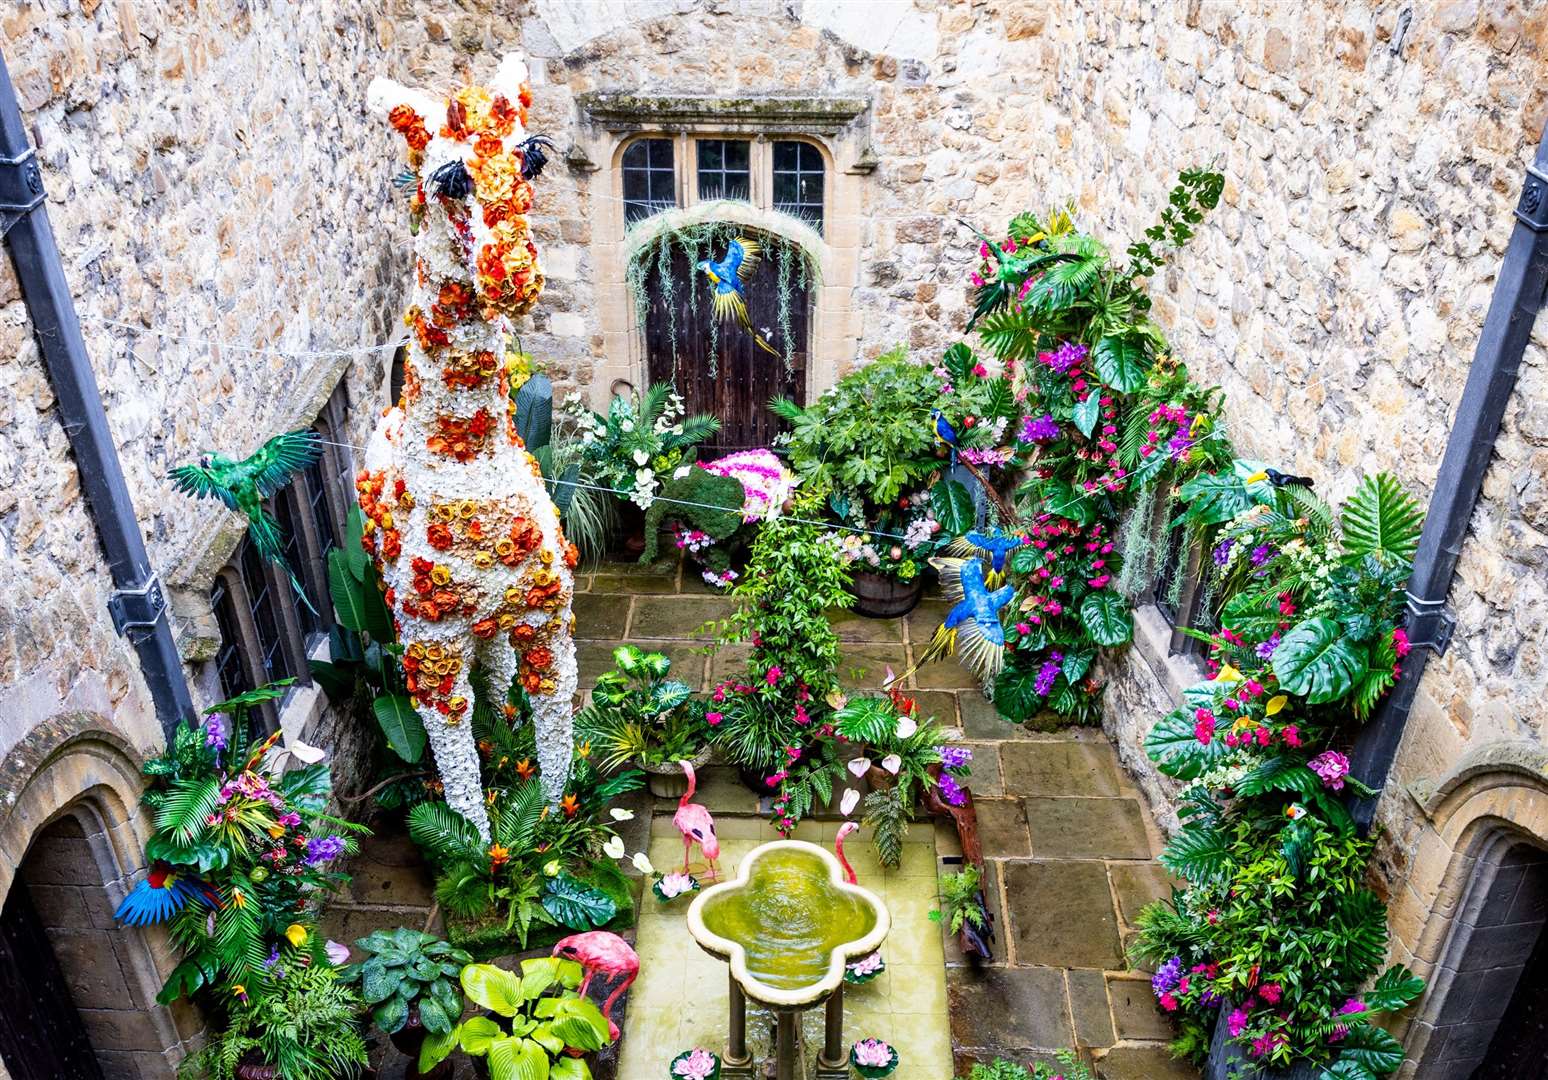 The giraffe is the centrepiece of a floral jungle. Picture: Leeds Castle